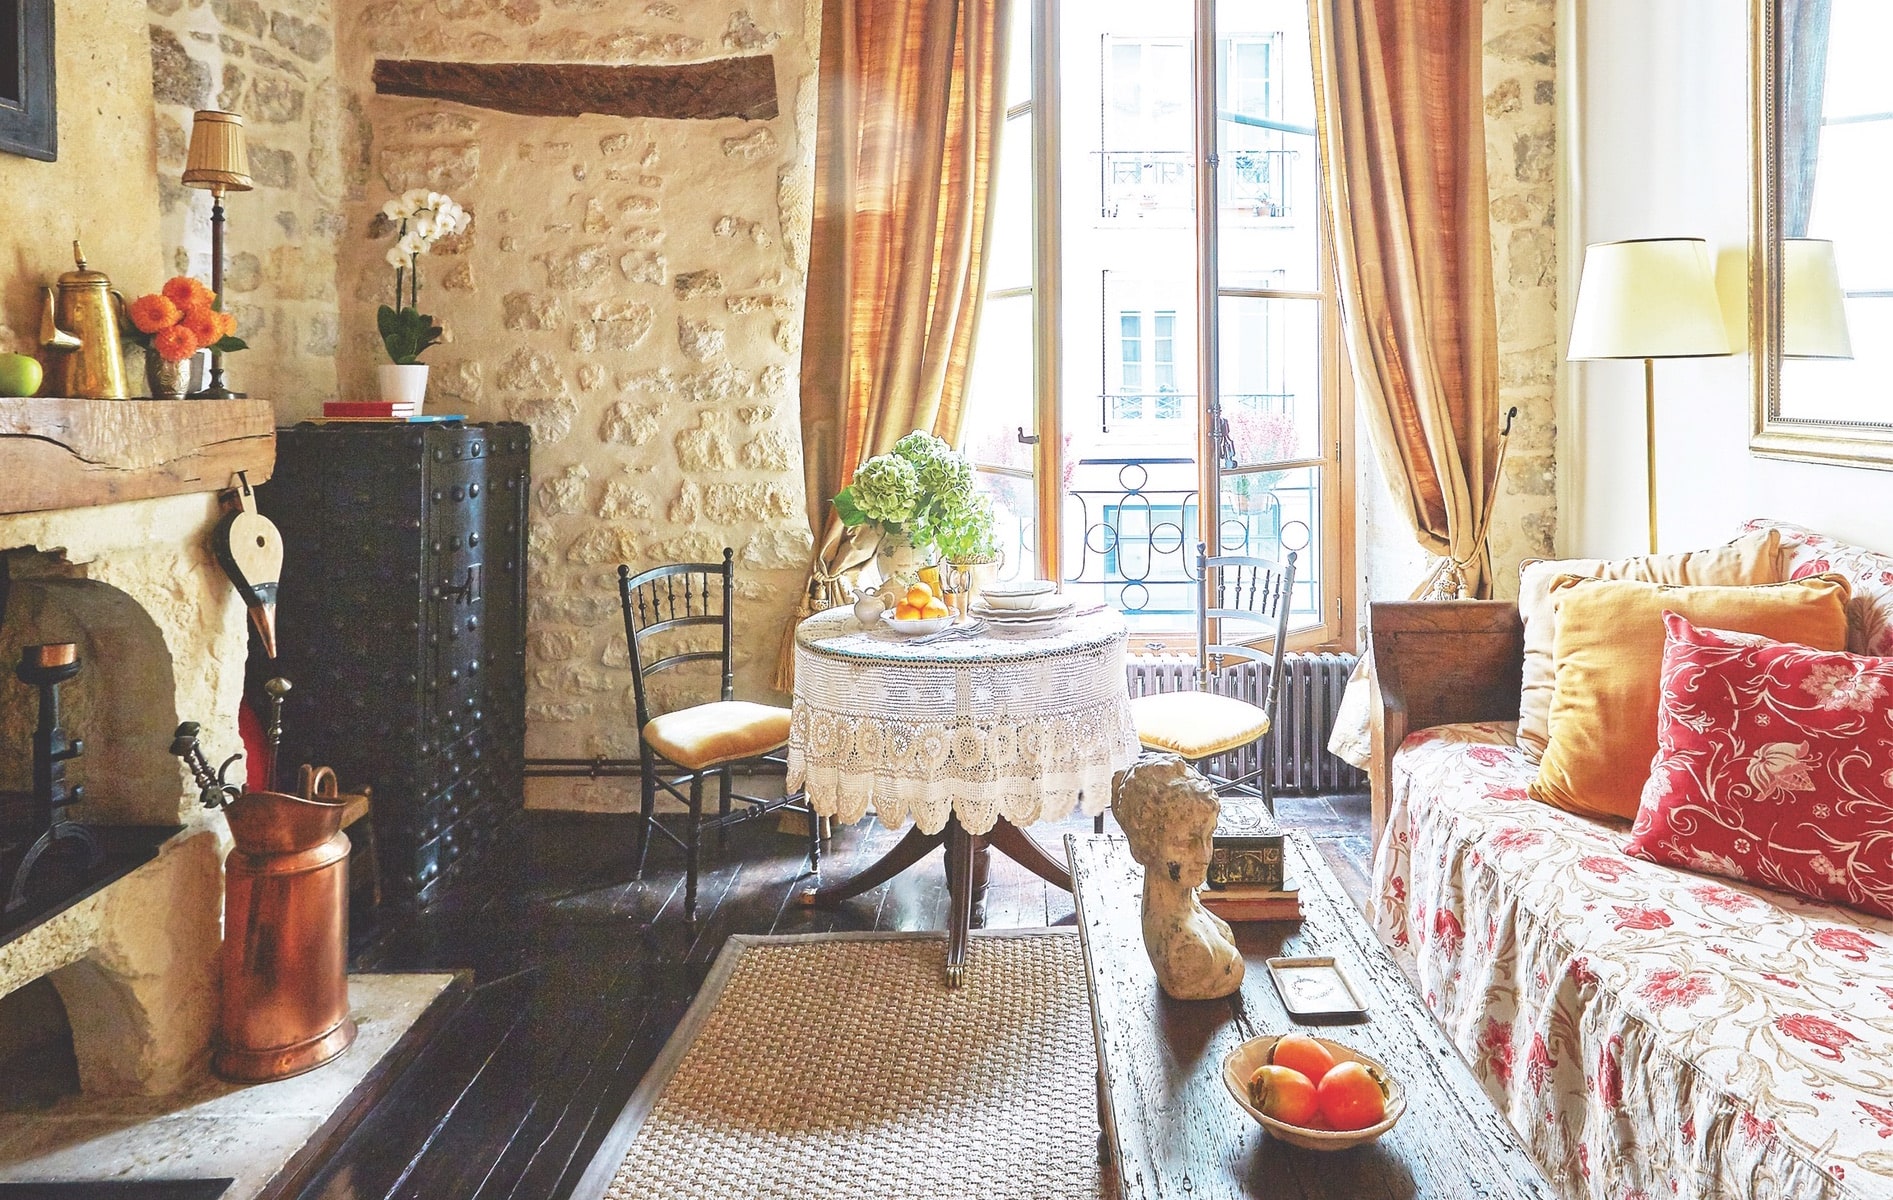 This perfect little pied-à-terre on Île Saint-Louis in Paris was built in 1652 and later renovated by a French filmmaker. It is available for rent through VRBO.com.